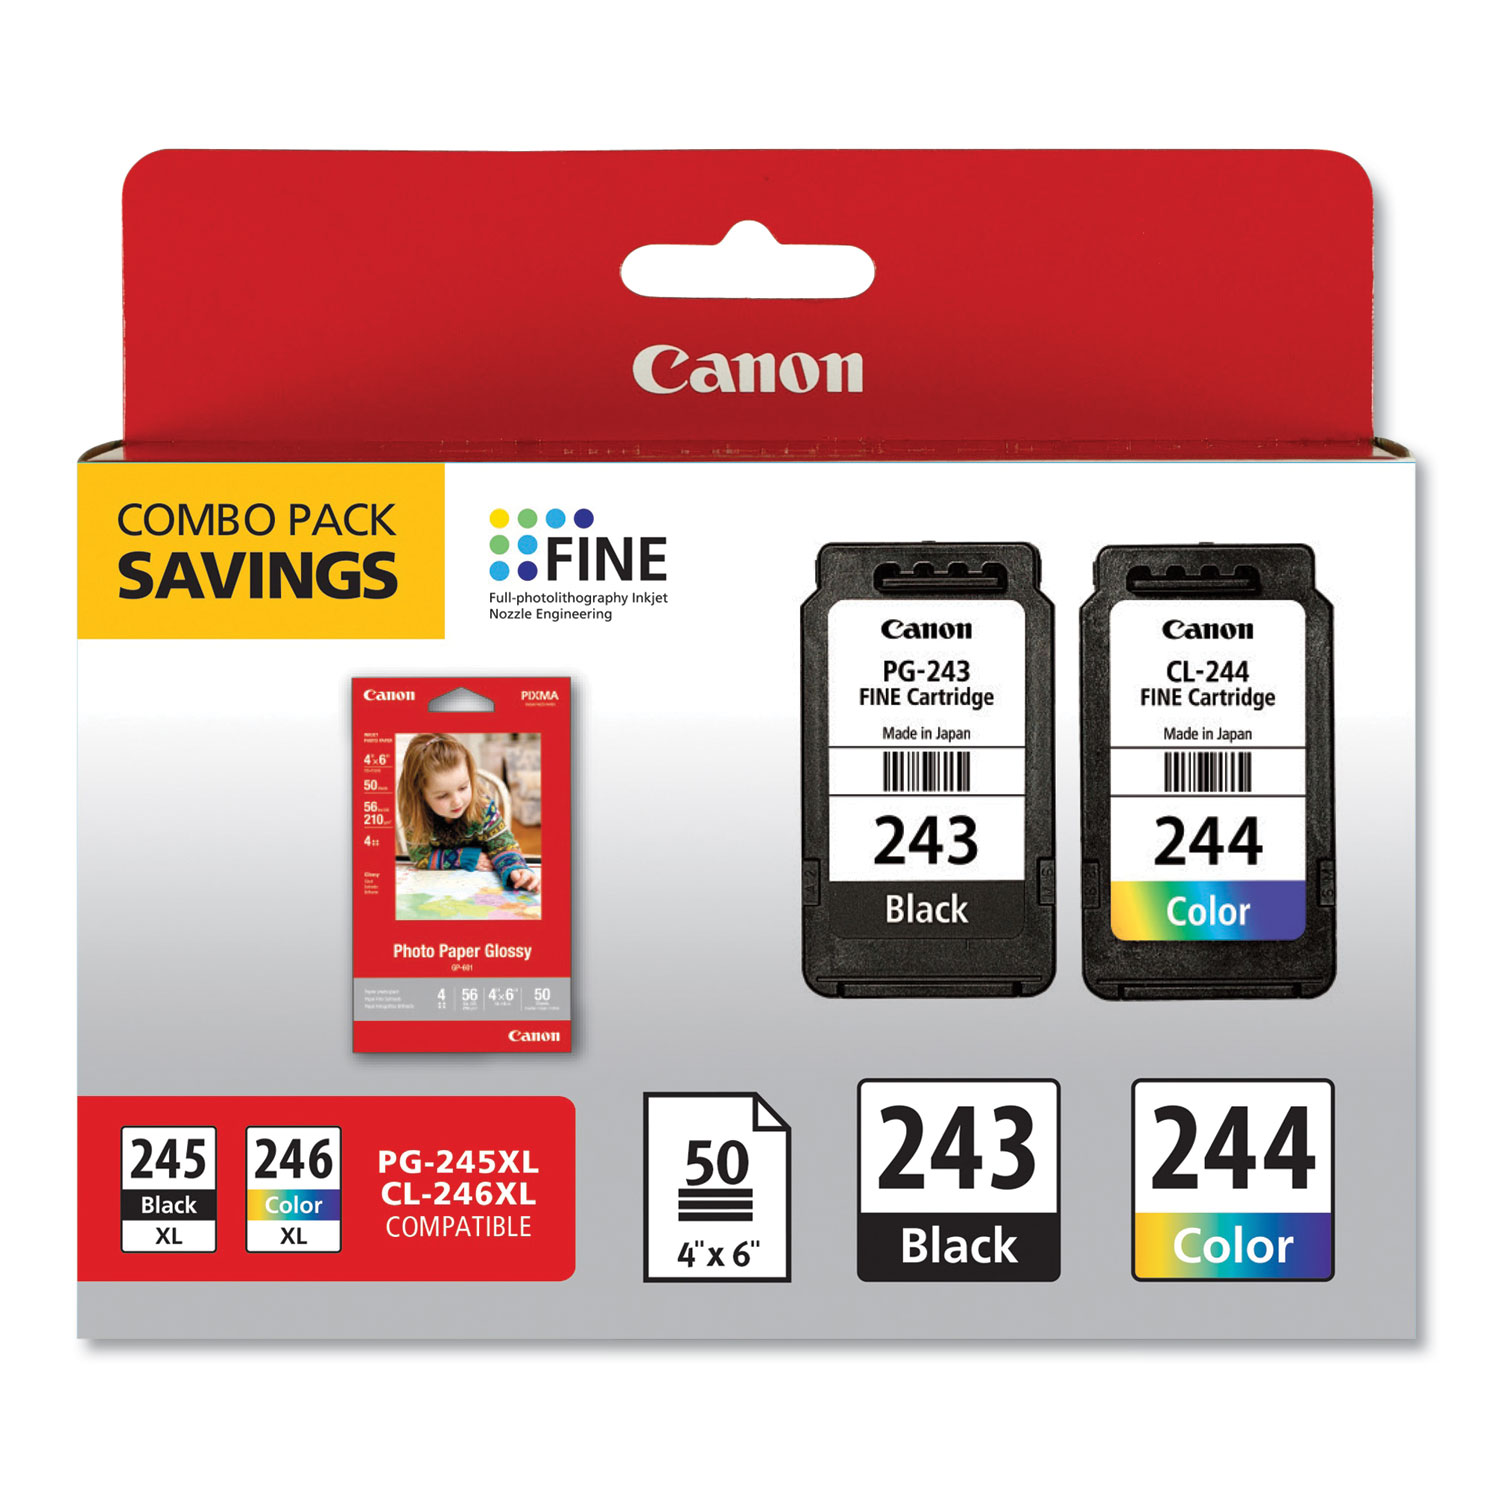 1287C005 (CL-244; PG-243BK) Ink Combo Pack, 50 Sheets of 4 x 6 Photo Paper Glossy, Black/Color